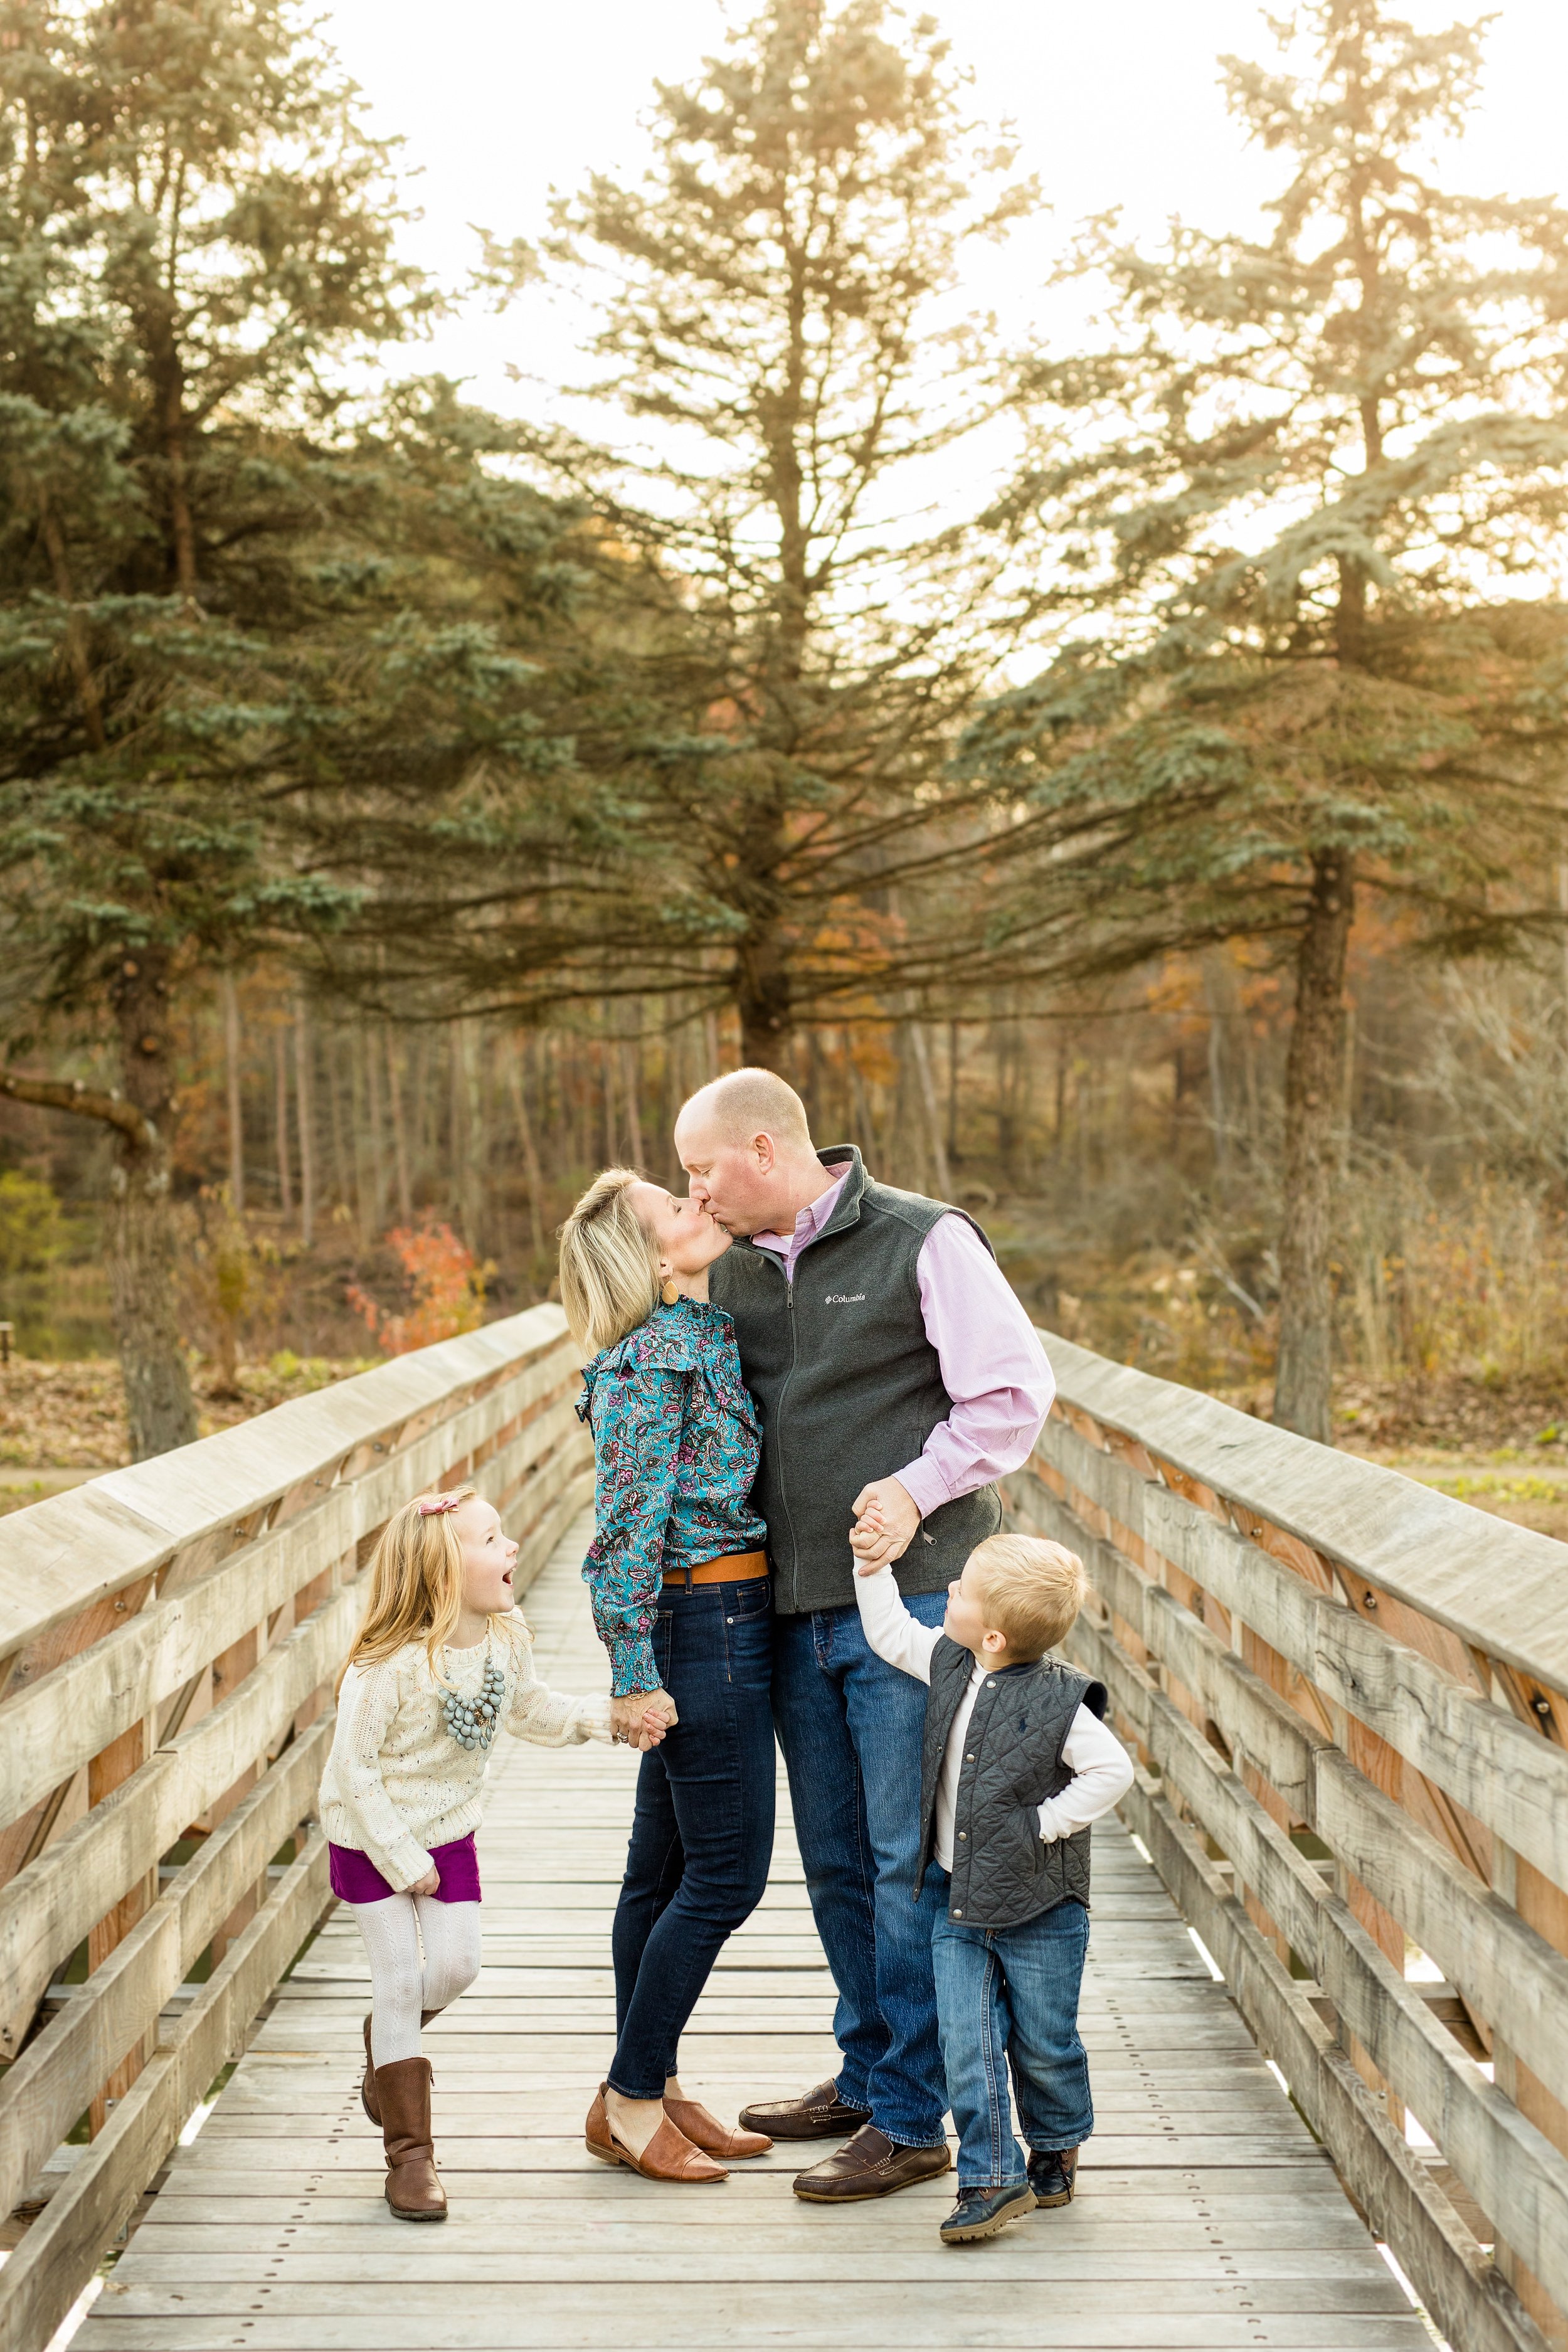 north park family pictures, pittsburgh family photographer, location ideas for family photos pittsburgh, cranberry township family photographer